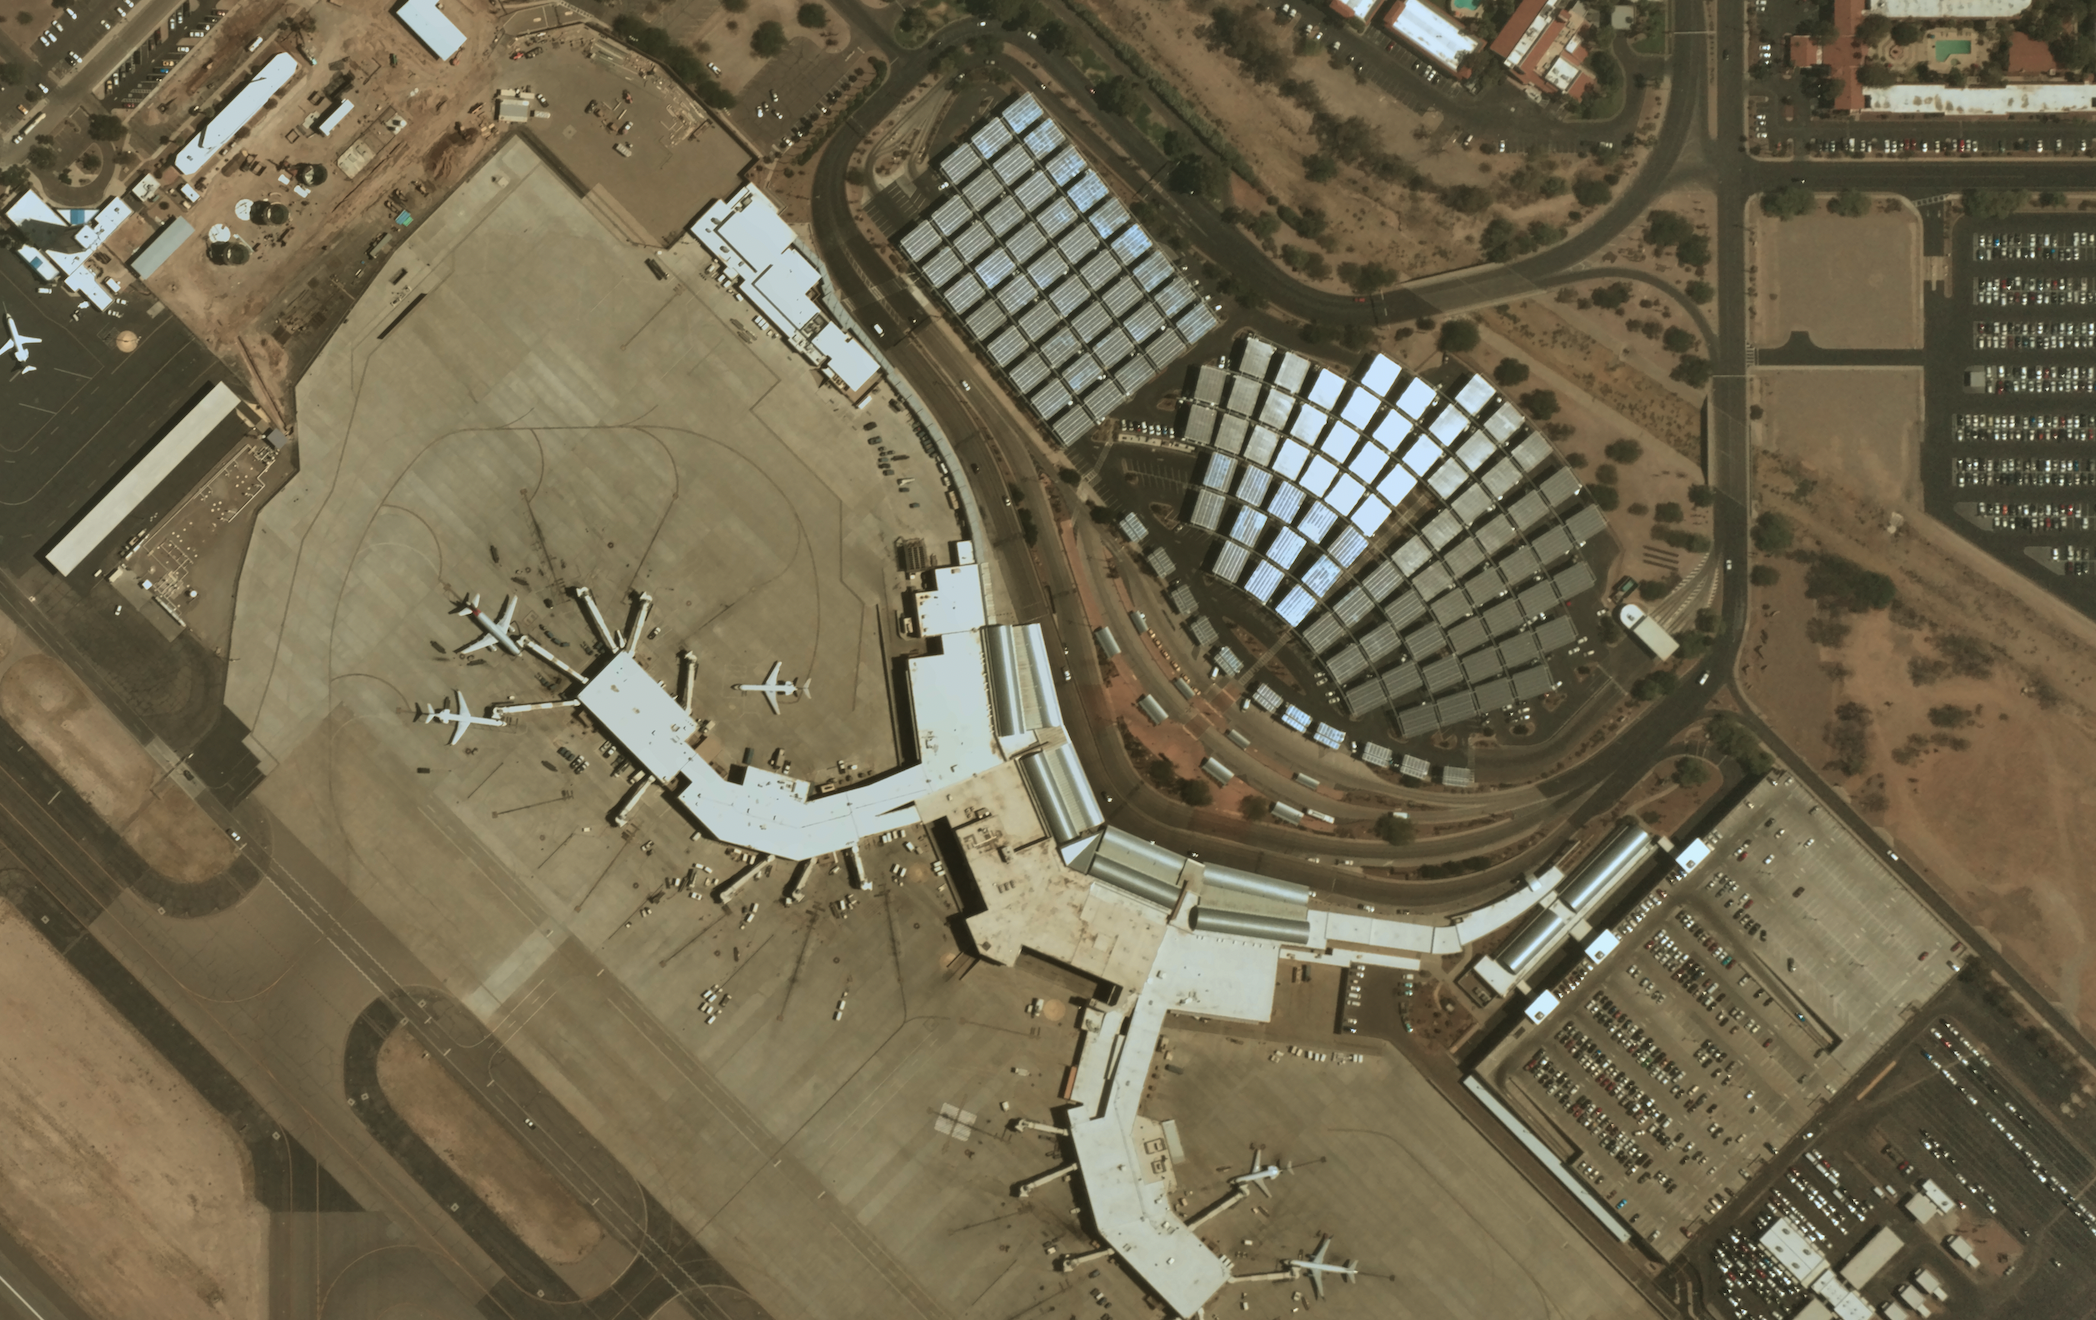 Near Space Labs image of Tuscon airport